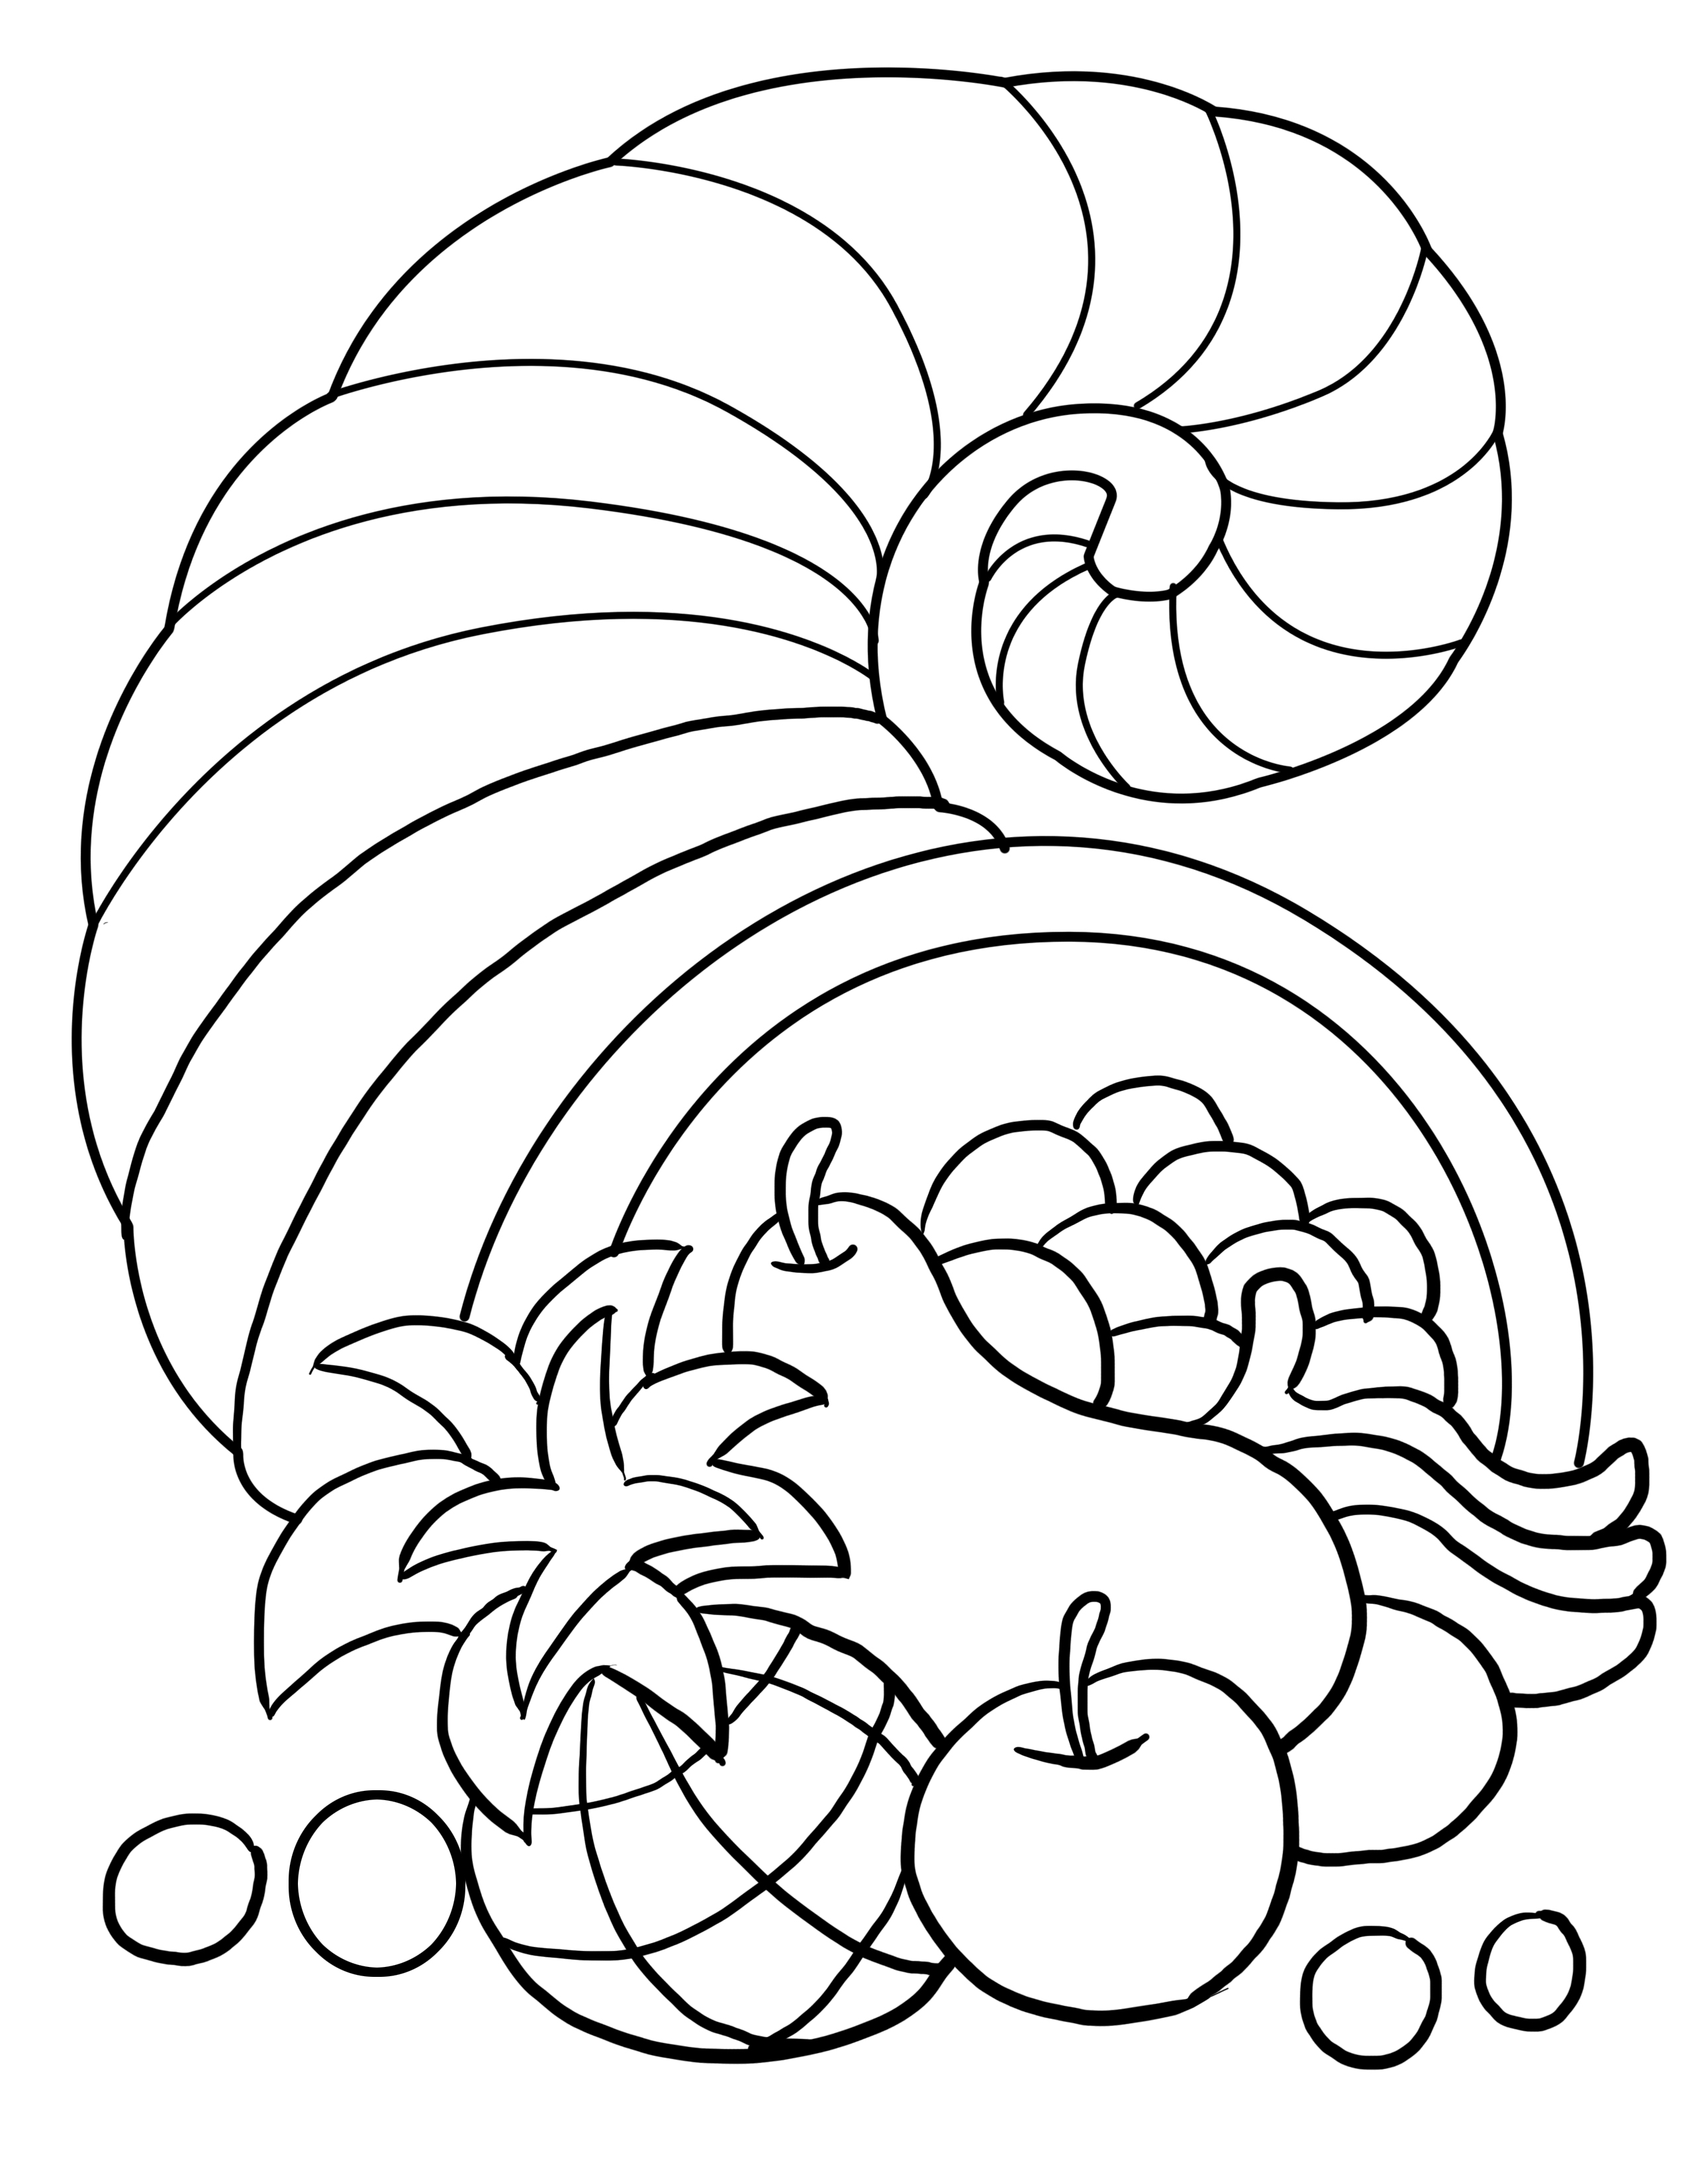 Thanksgiving Coloring Pages Free Printable Pdf